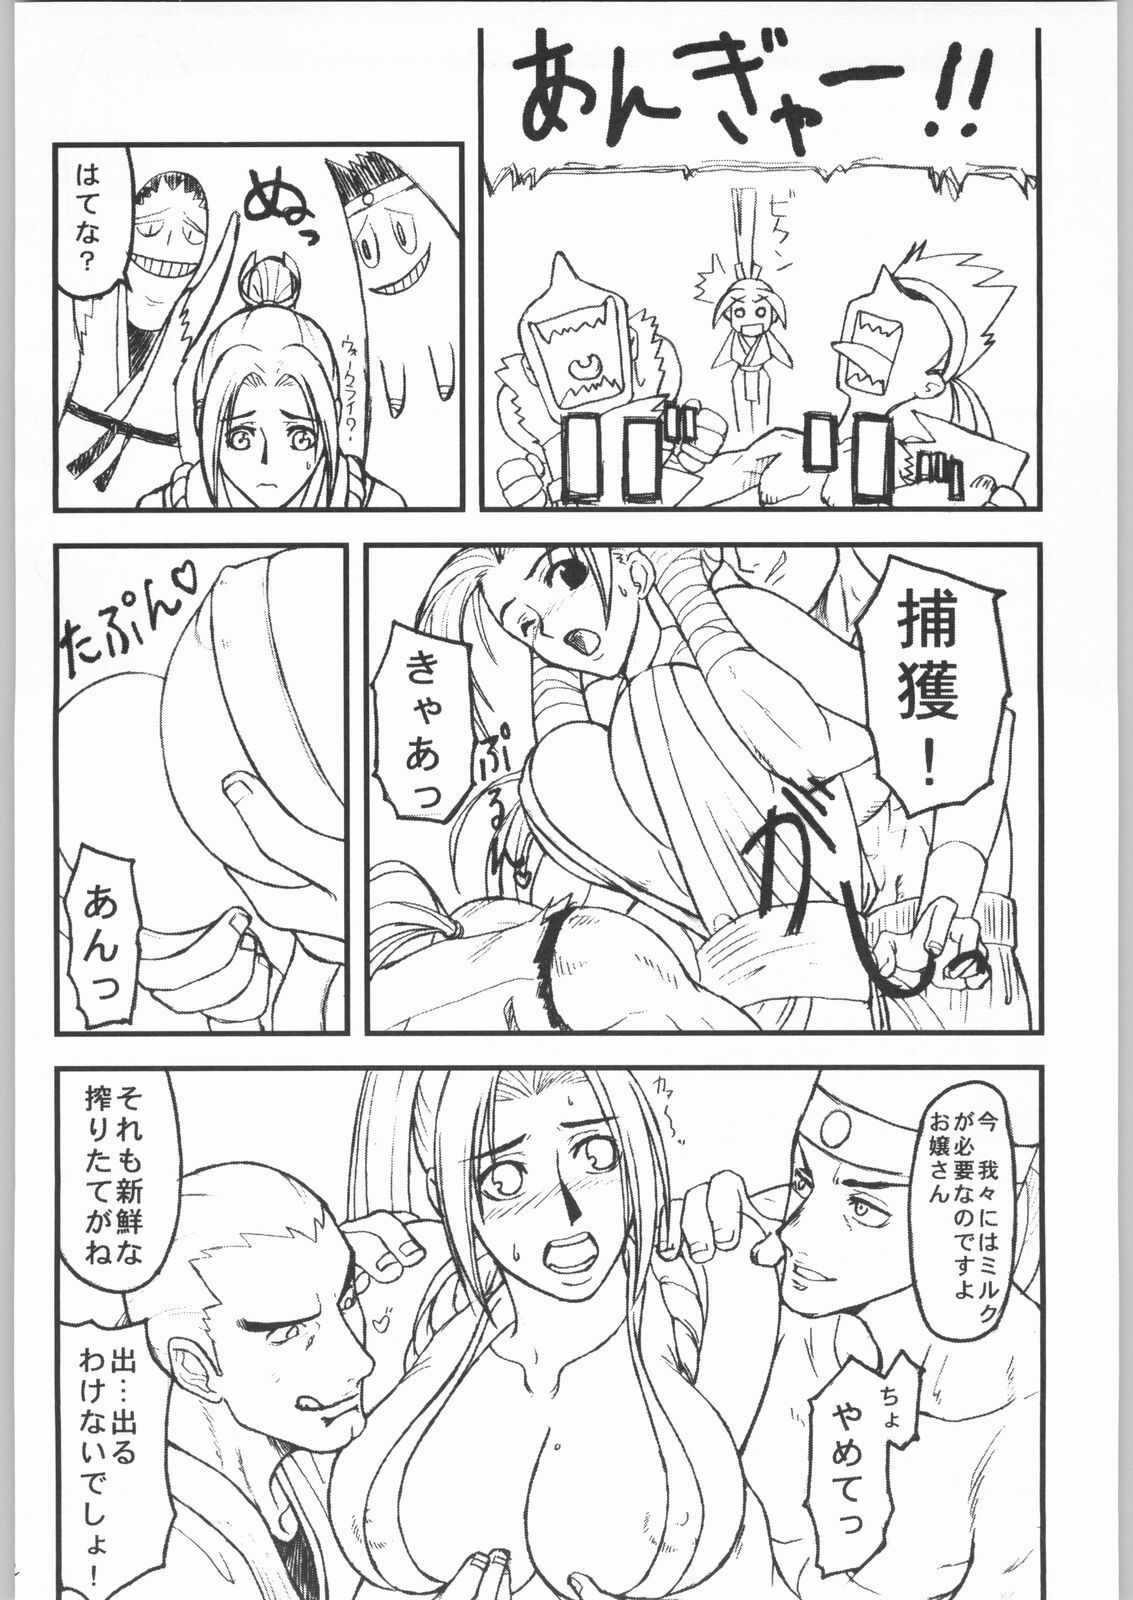 [SNK] Shiranui (Over Flows) page 21 full